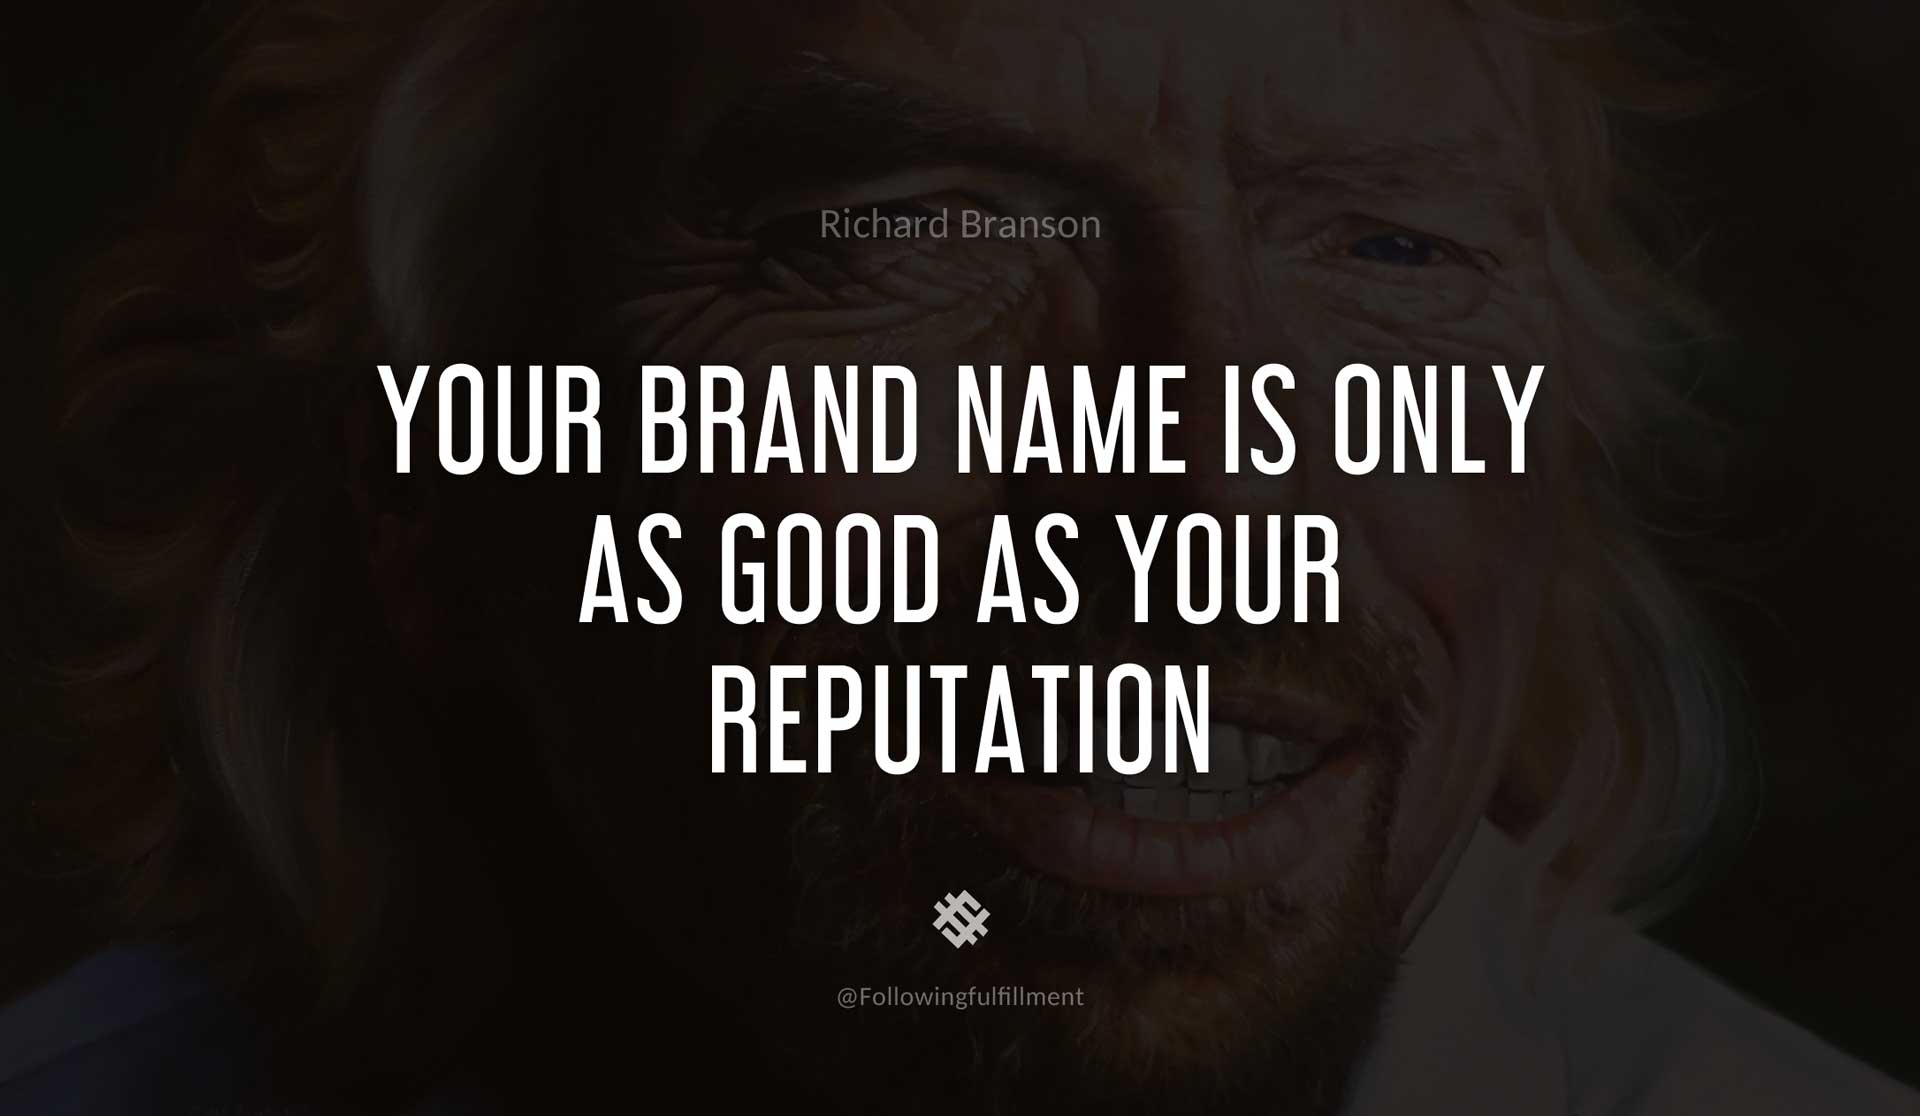 Your-brand-name-is-only-as-good-as-your-reputation-RICHARD-BRANSON-Quote.jpg